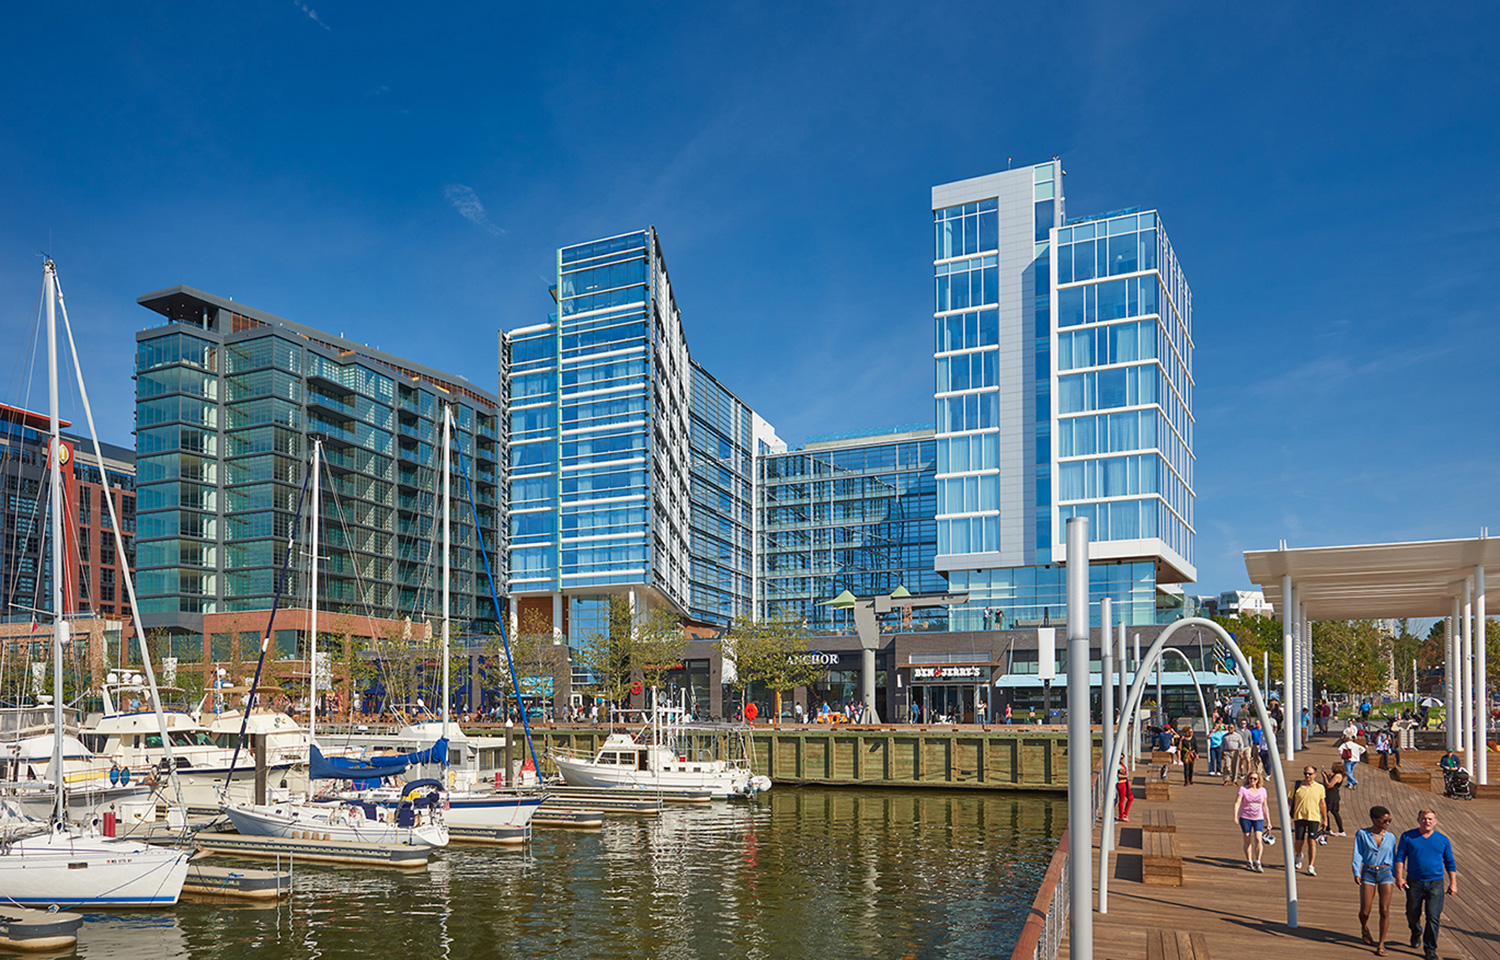 Hotels at the Wharf